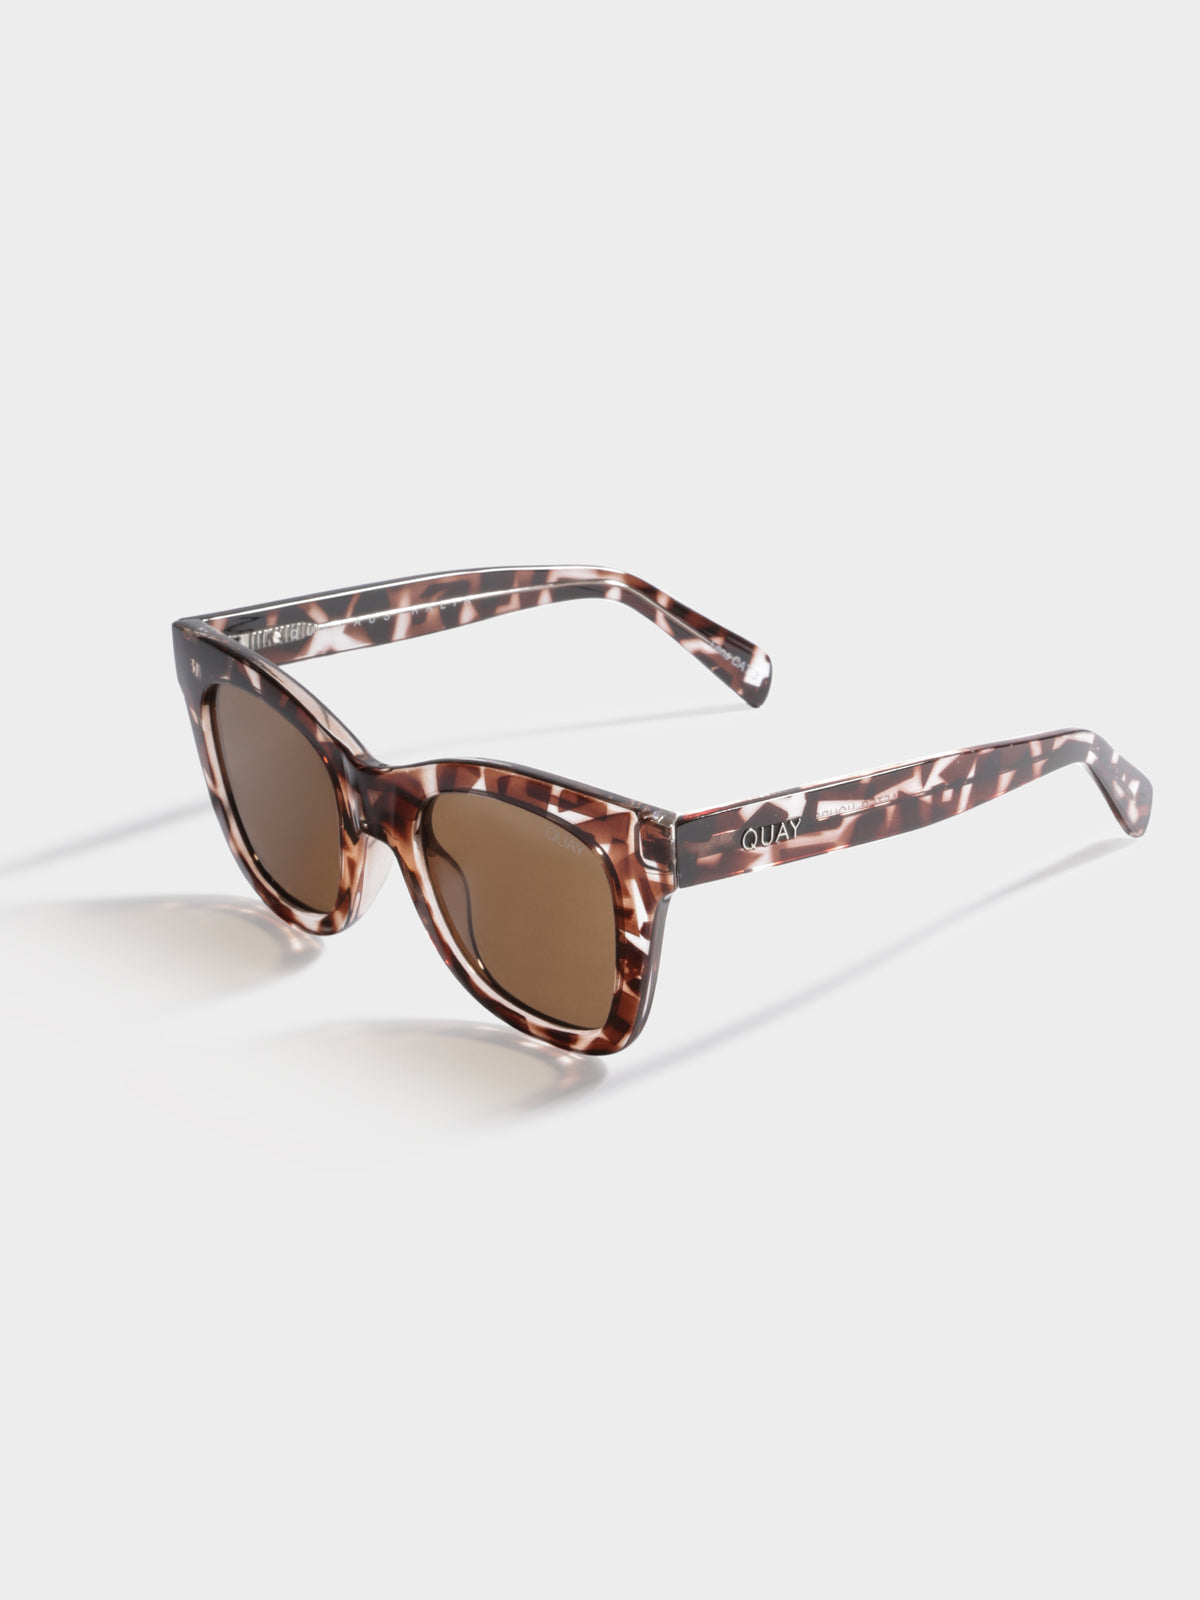 Womens After Hours Sunglasses in Tortoiseshell Finish with Brown Lenses